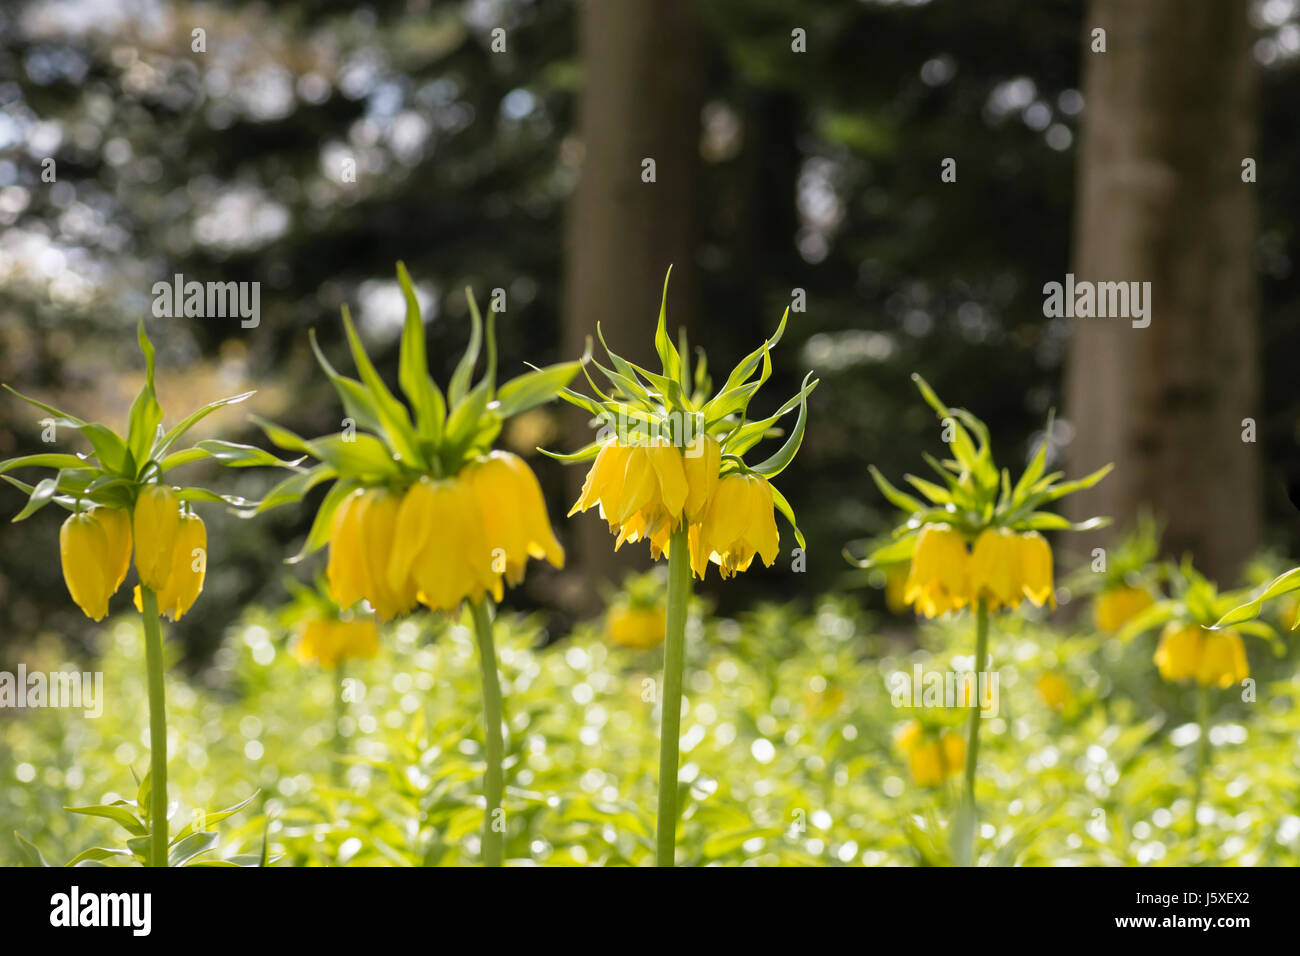 Fritillary, Crown imperial 'Maxima Lutea', Fritillaria imperialis 'Maxima Lutea', Backlit yellow flowers growing outdoor. Stock Photo